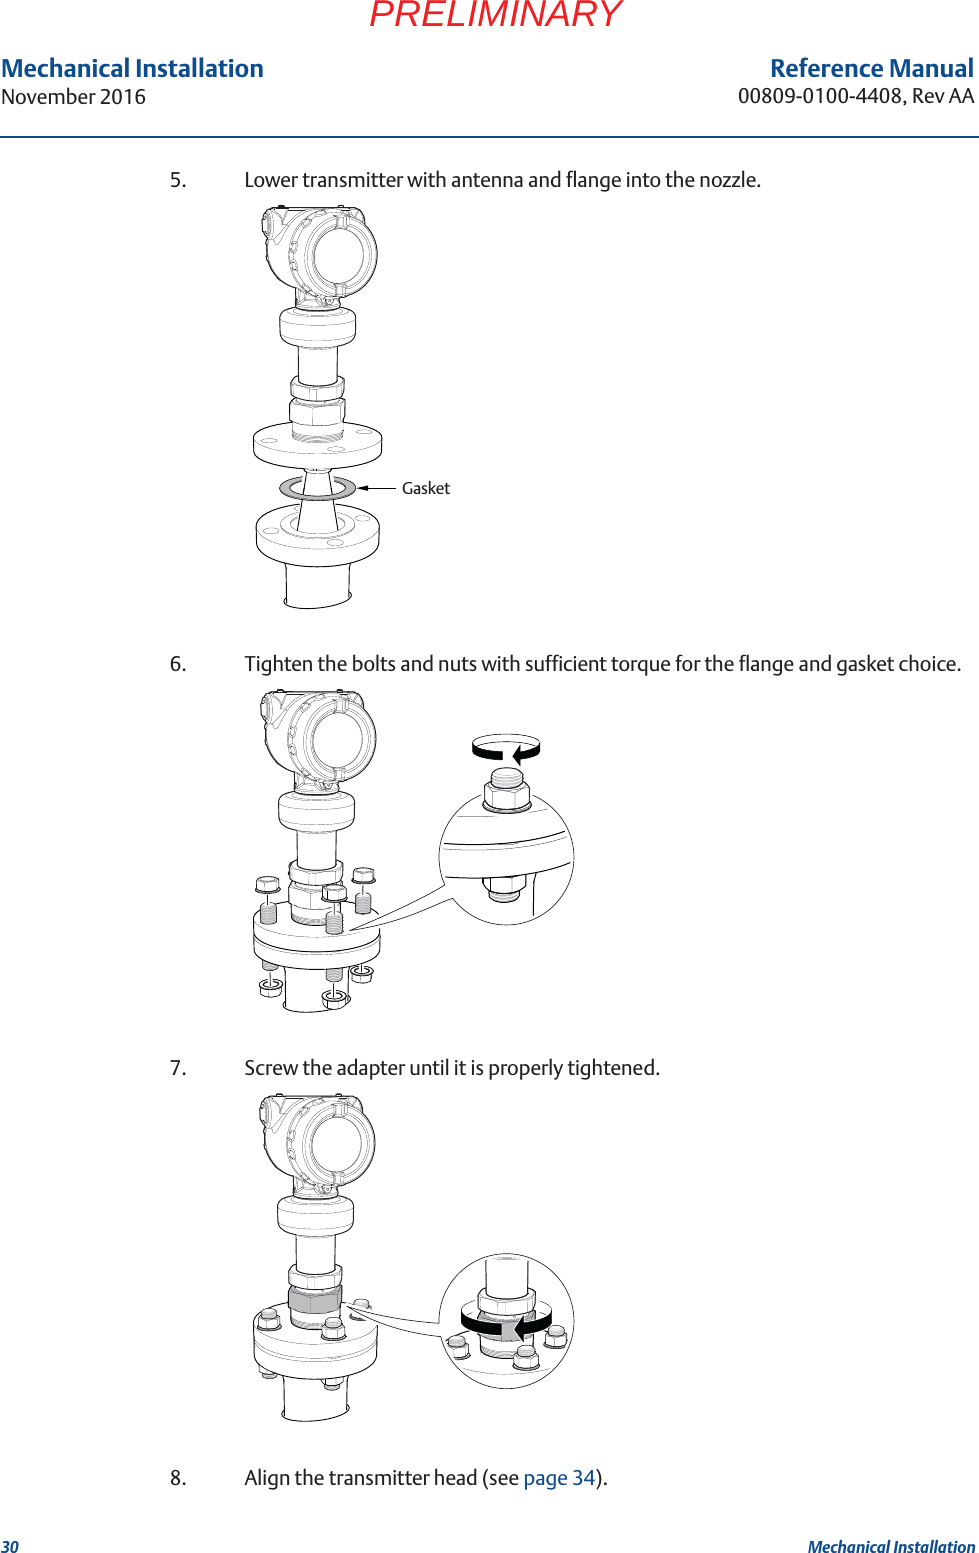 30Reference Manual00809-0100-4408, Rev AAMechanical InstallationNovember 2016Mechanical InstallationPRELIMINARY5. Lower transmitter with antenna and flange into the nozzle.6. Tighten the bolts and nuts with sufficient torque for the flange and gasket choice.7. Screw the adapter until it is properly tightened.8. Align the transmitter head (see page 34).Gasket